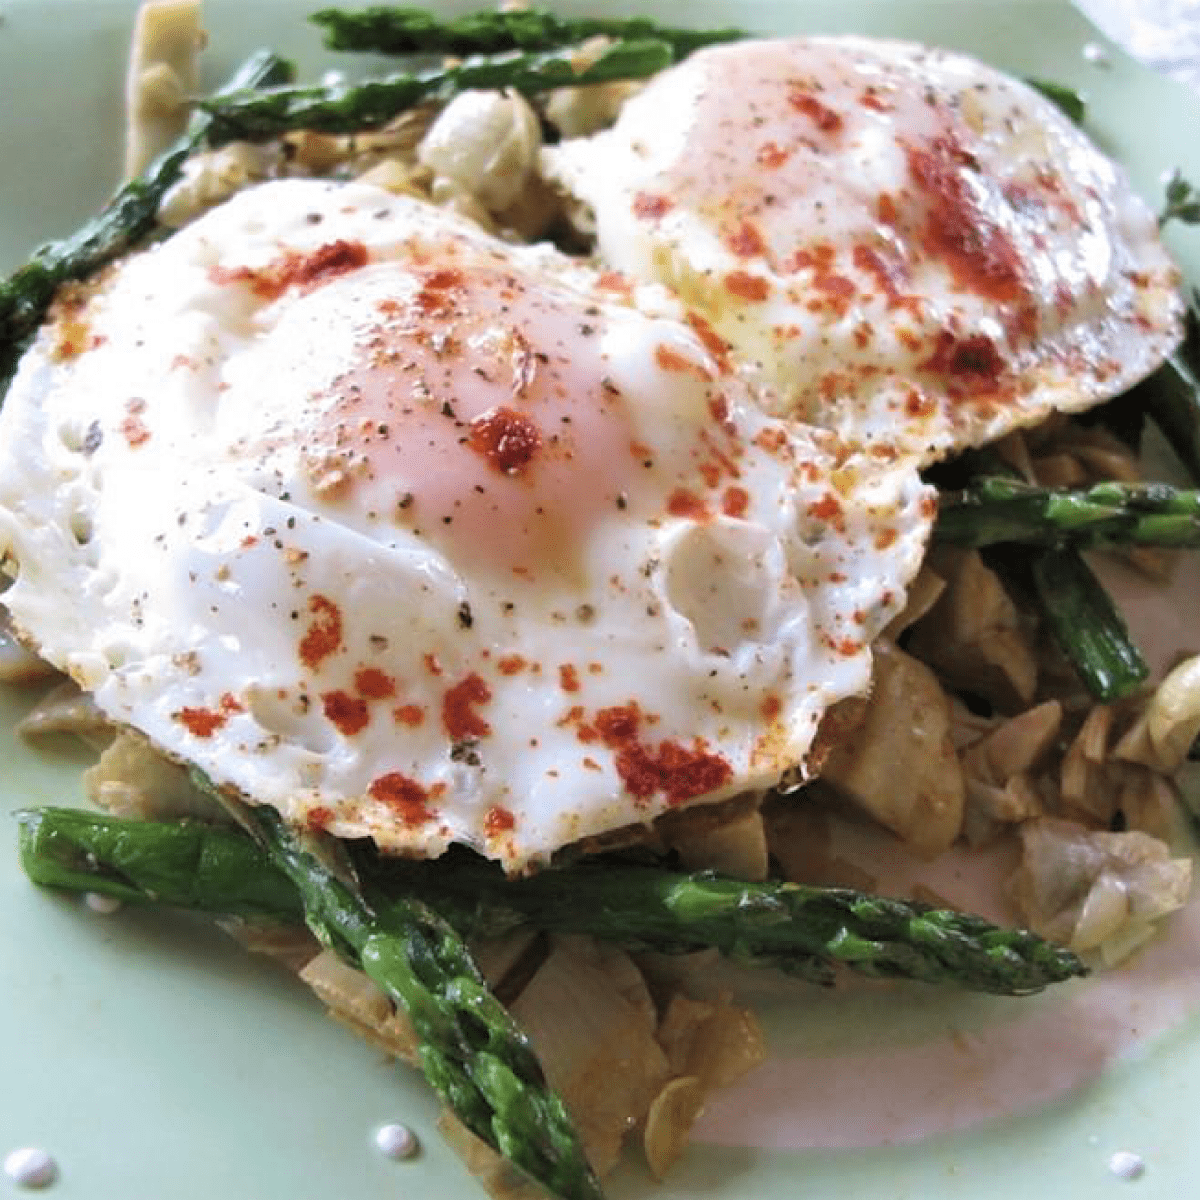 Breakfast of eggs on a bed of asparagus and artichoke hearts